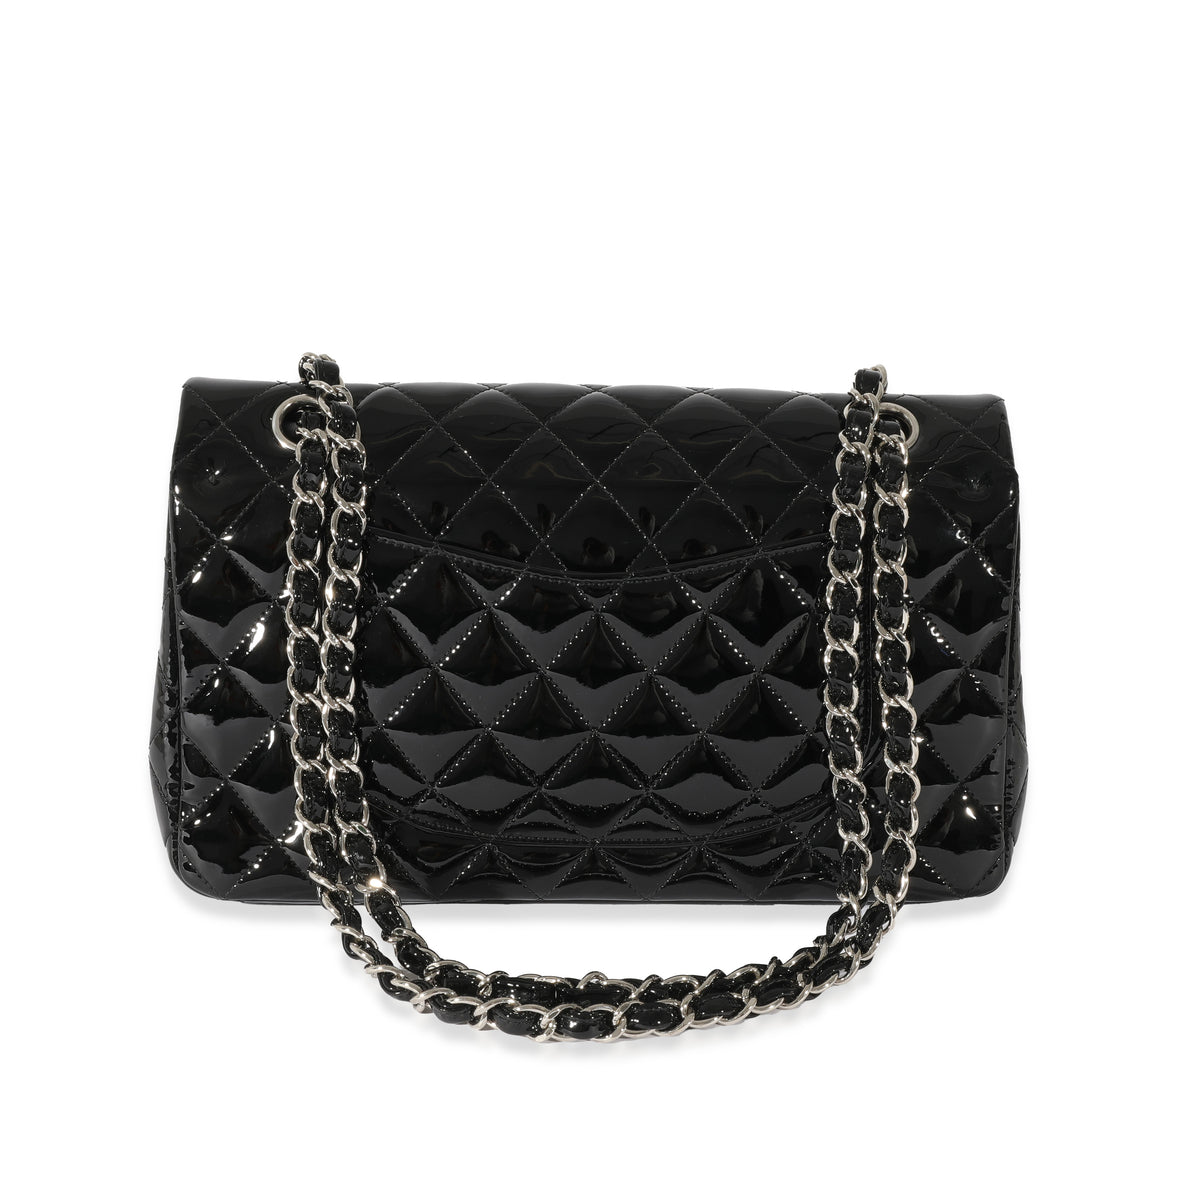 Chanel Black Quilted Patent Leather Medium Classic Double Flap Bag, myGemma, JP